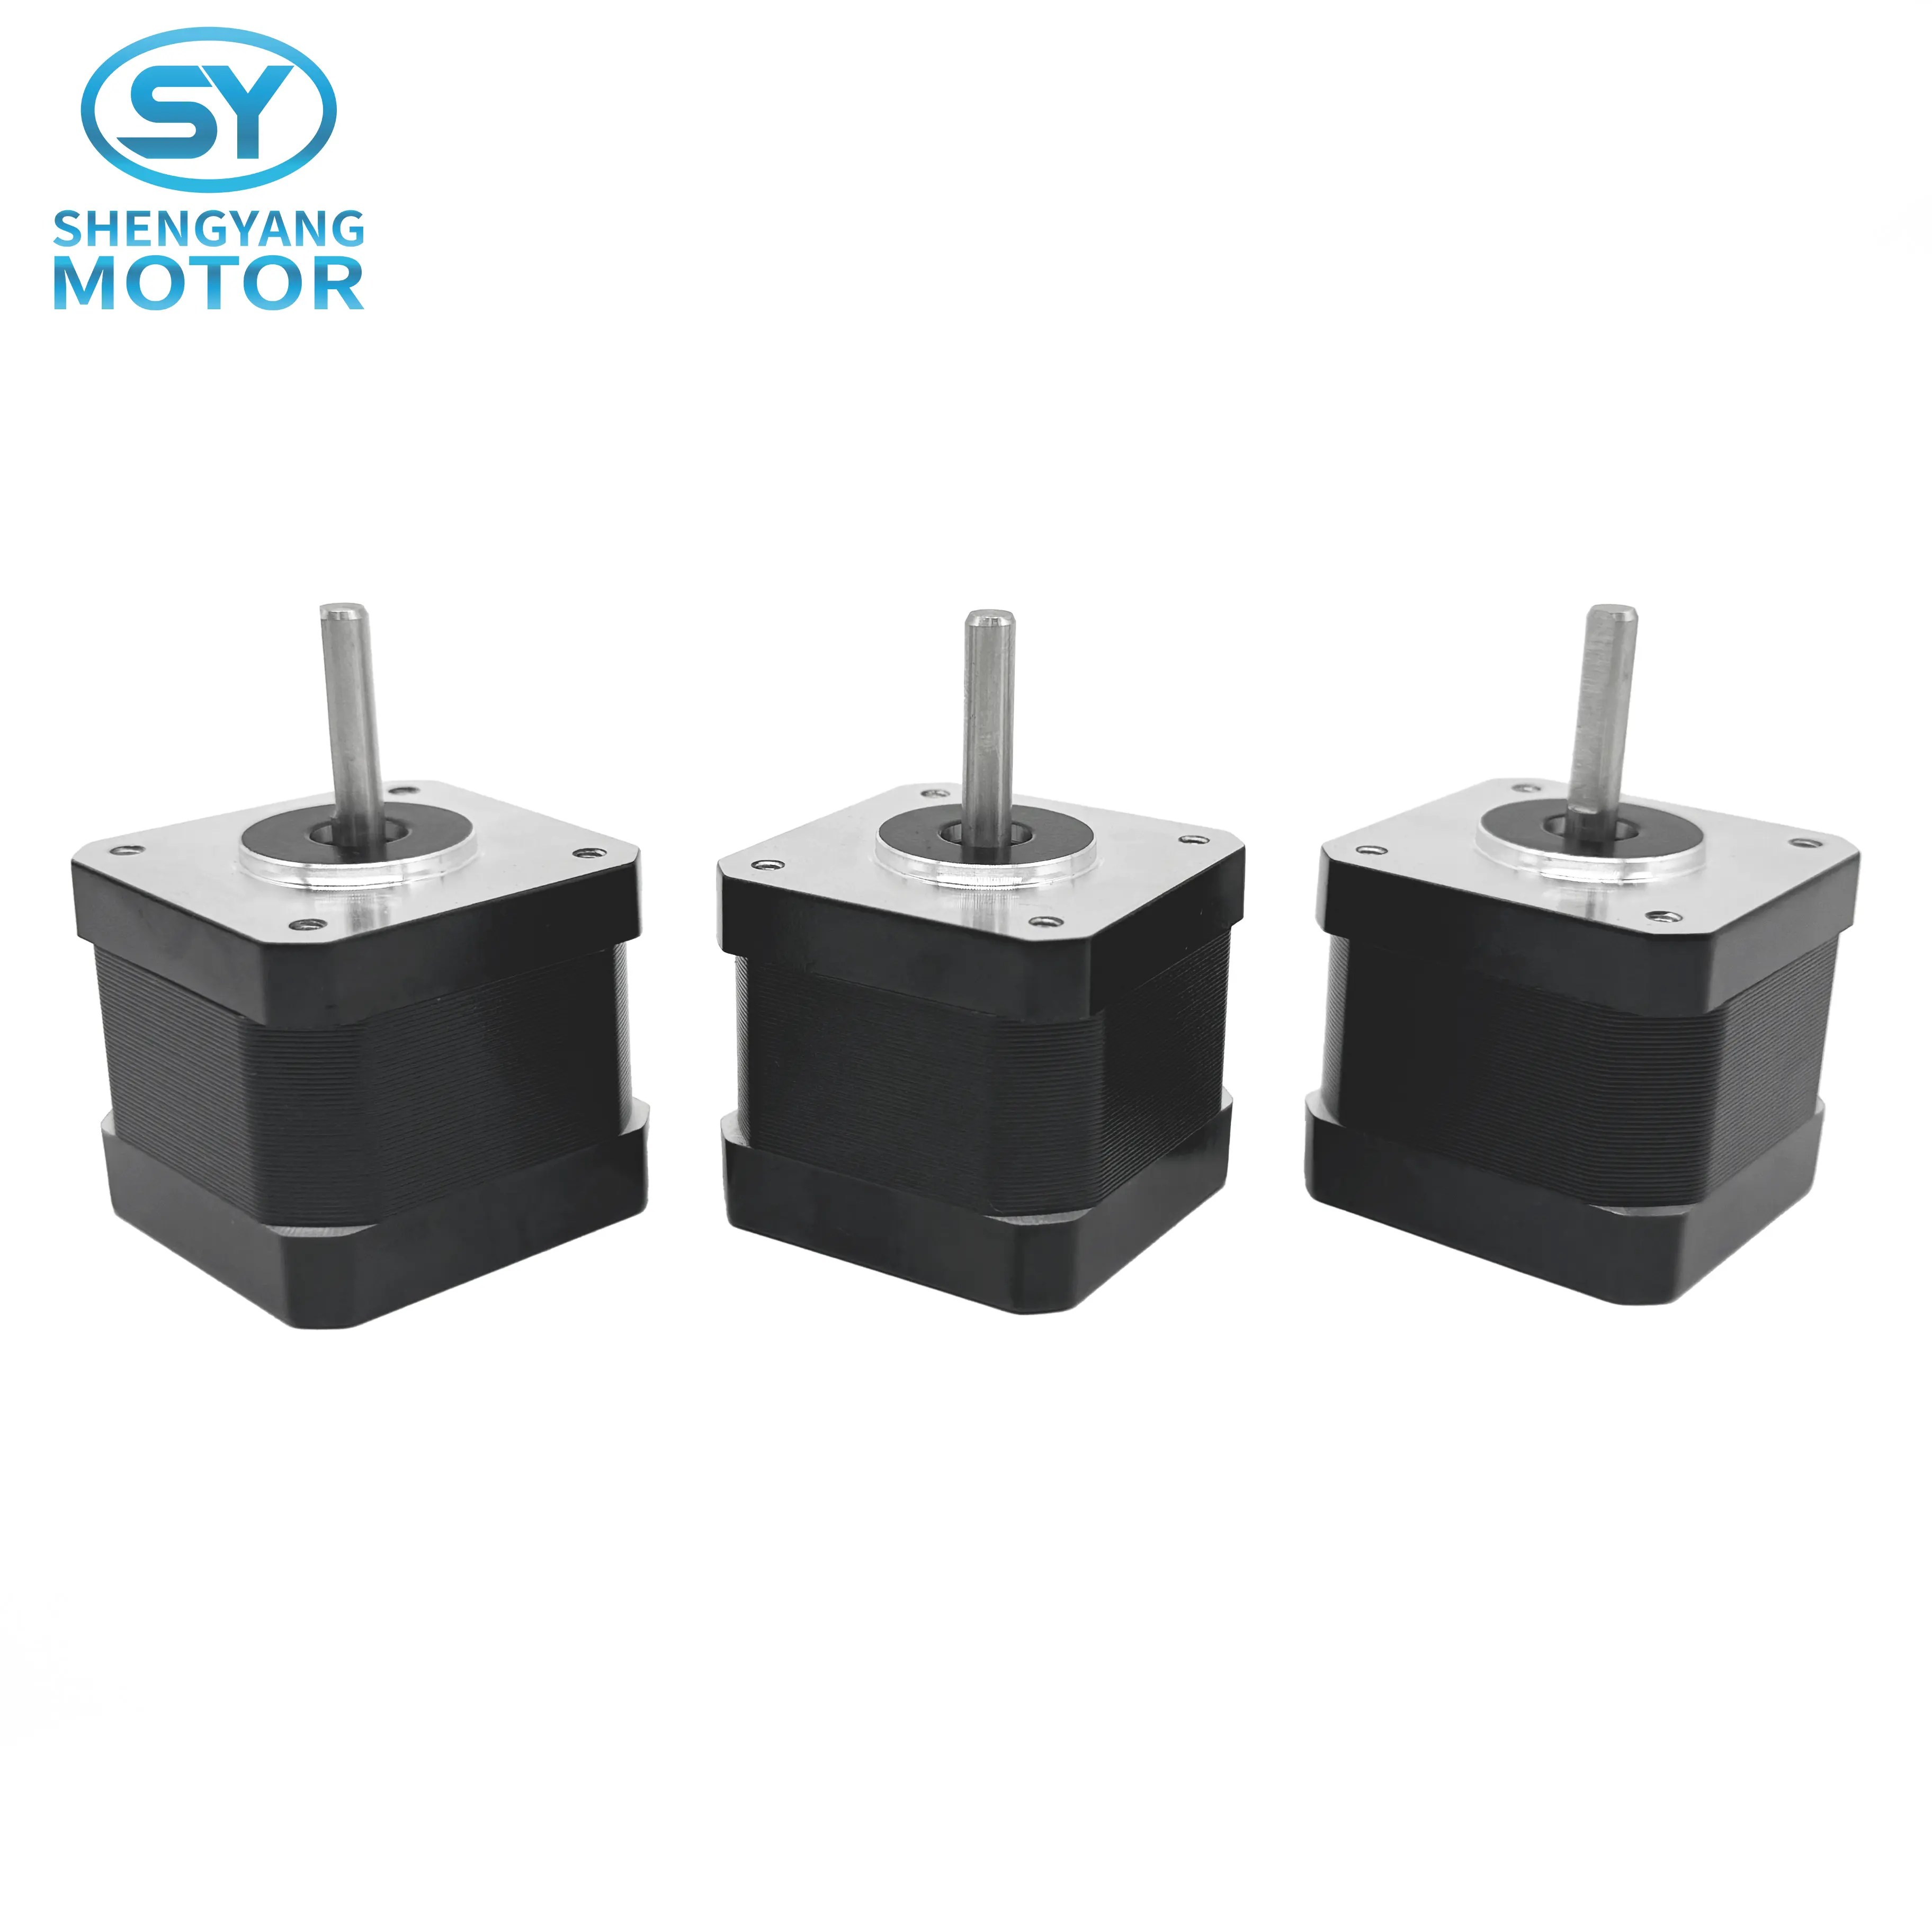 Low Cost Smooth Inventory Nema 17 Stepper Motor for 3D Printer